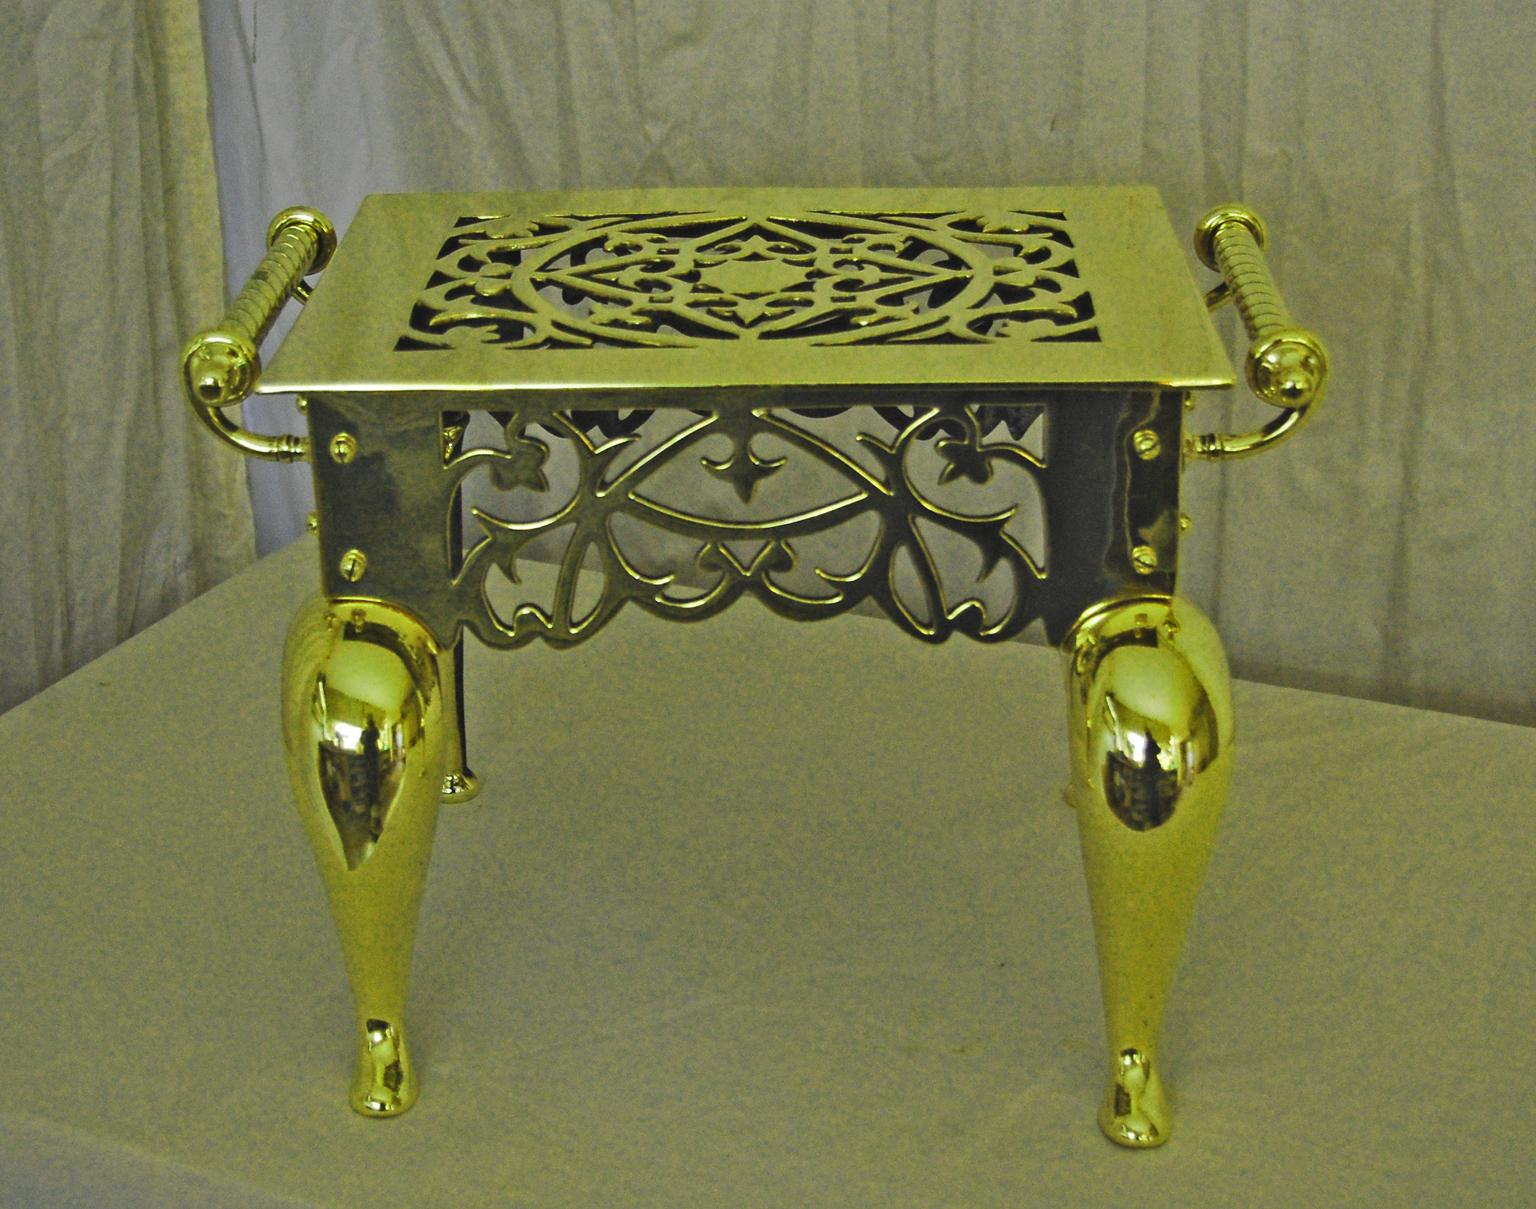   English cast brass footman with cabriole legs and pierced skirting on all four sides, twist side handles.   It is unusual to have the pierced skirting on the back as well as the other three sides.   This quite heavy fine quality footman was